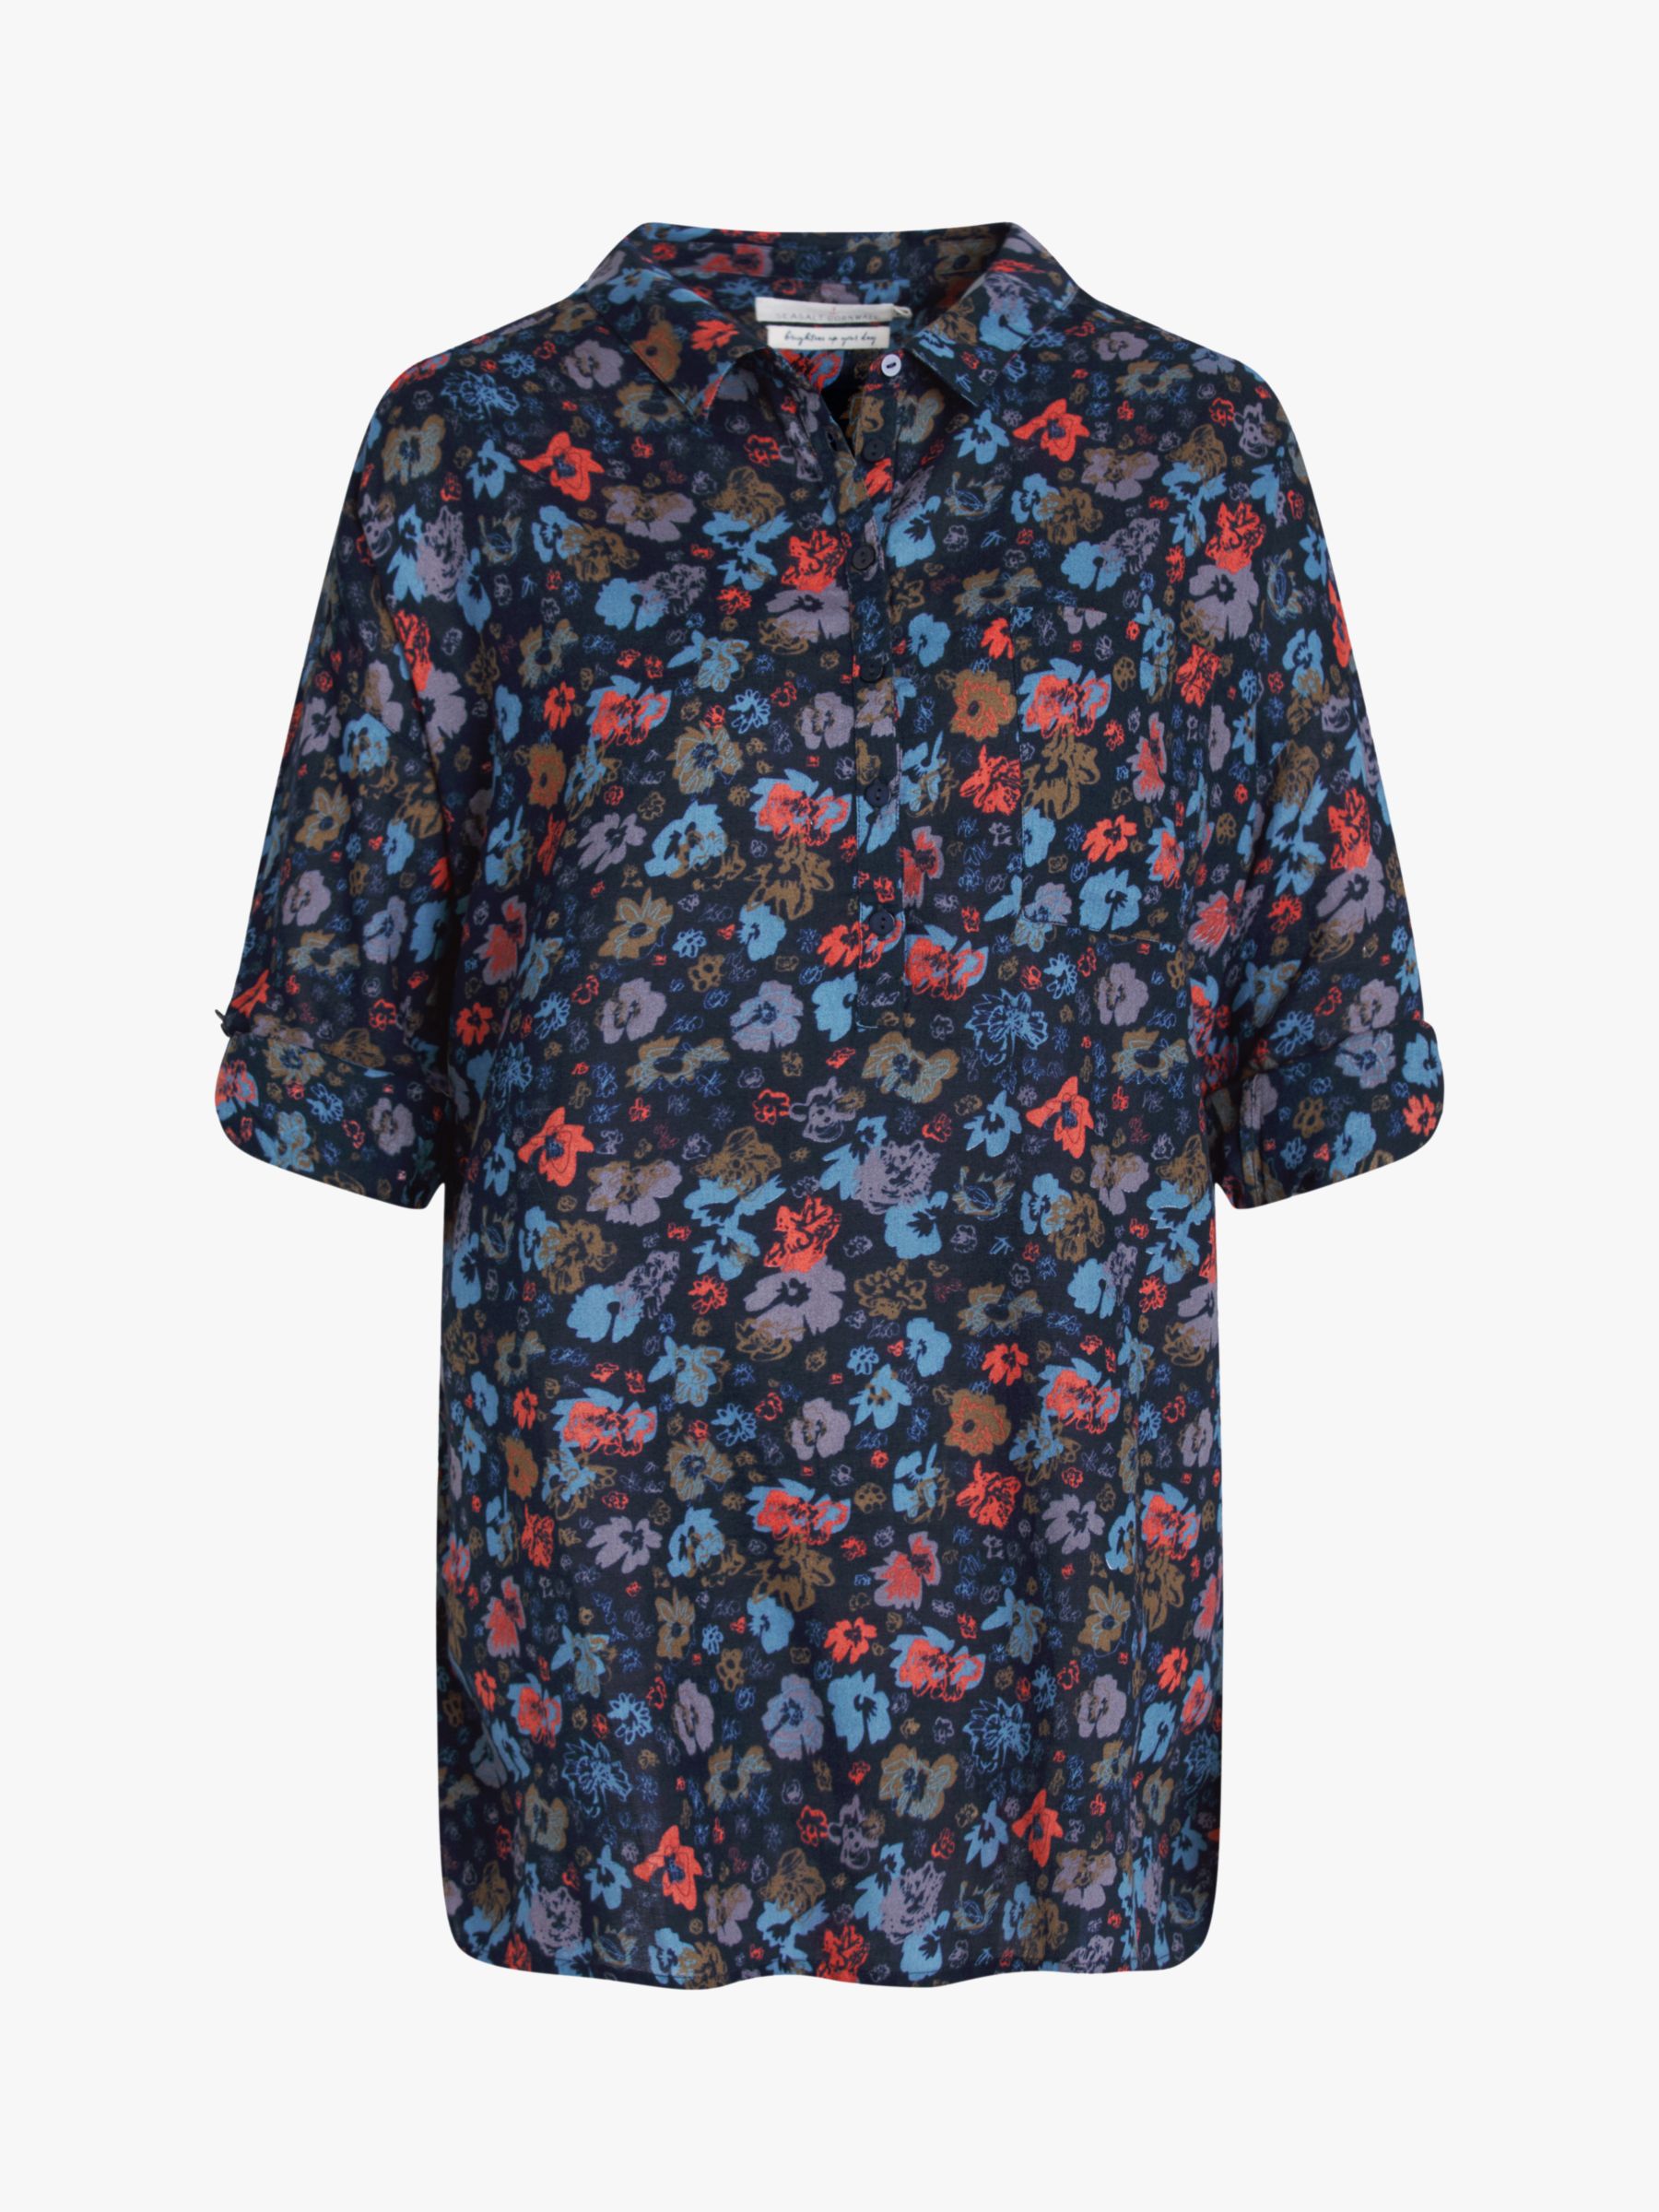 Seasalt Polpeor Shirt, Scattered Flowers Magpie